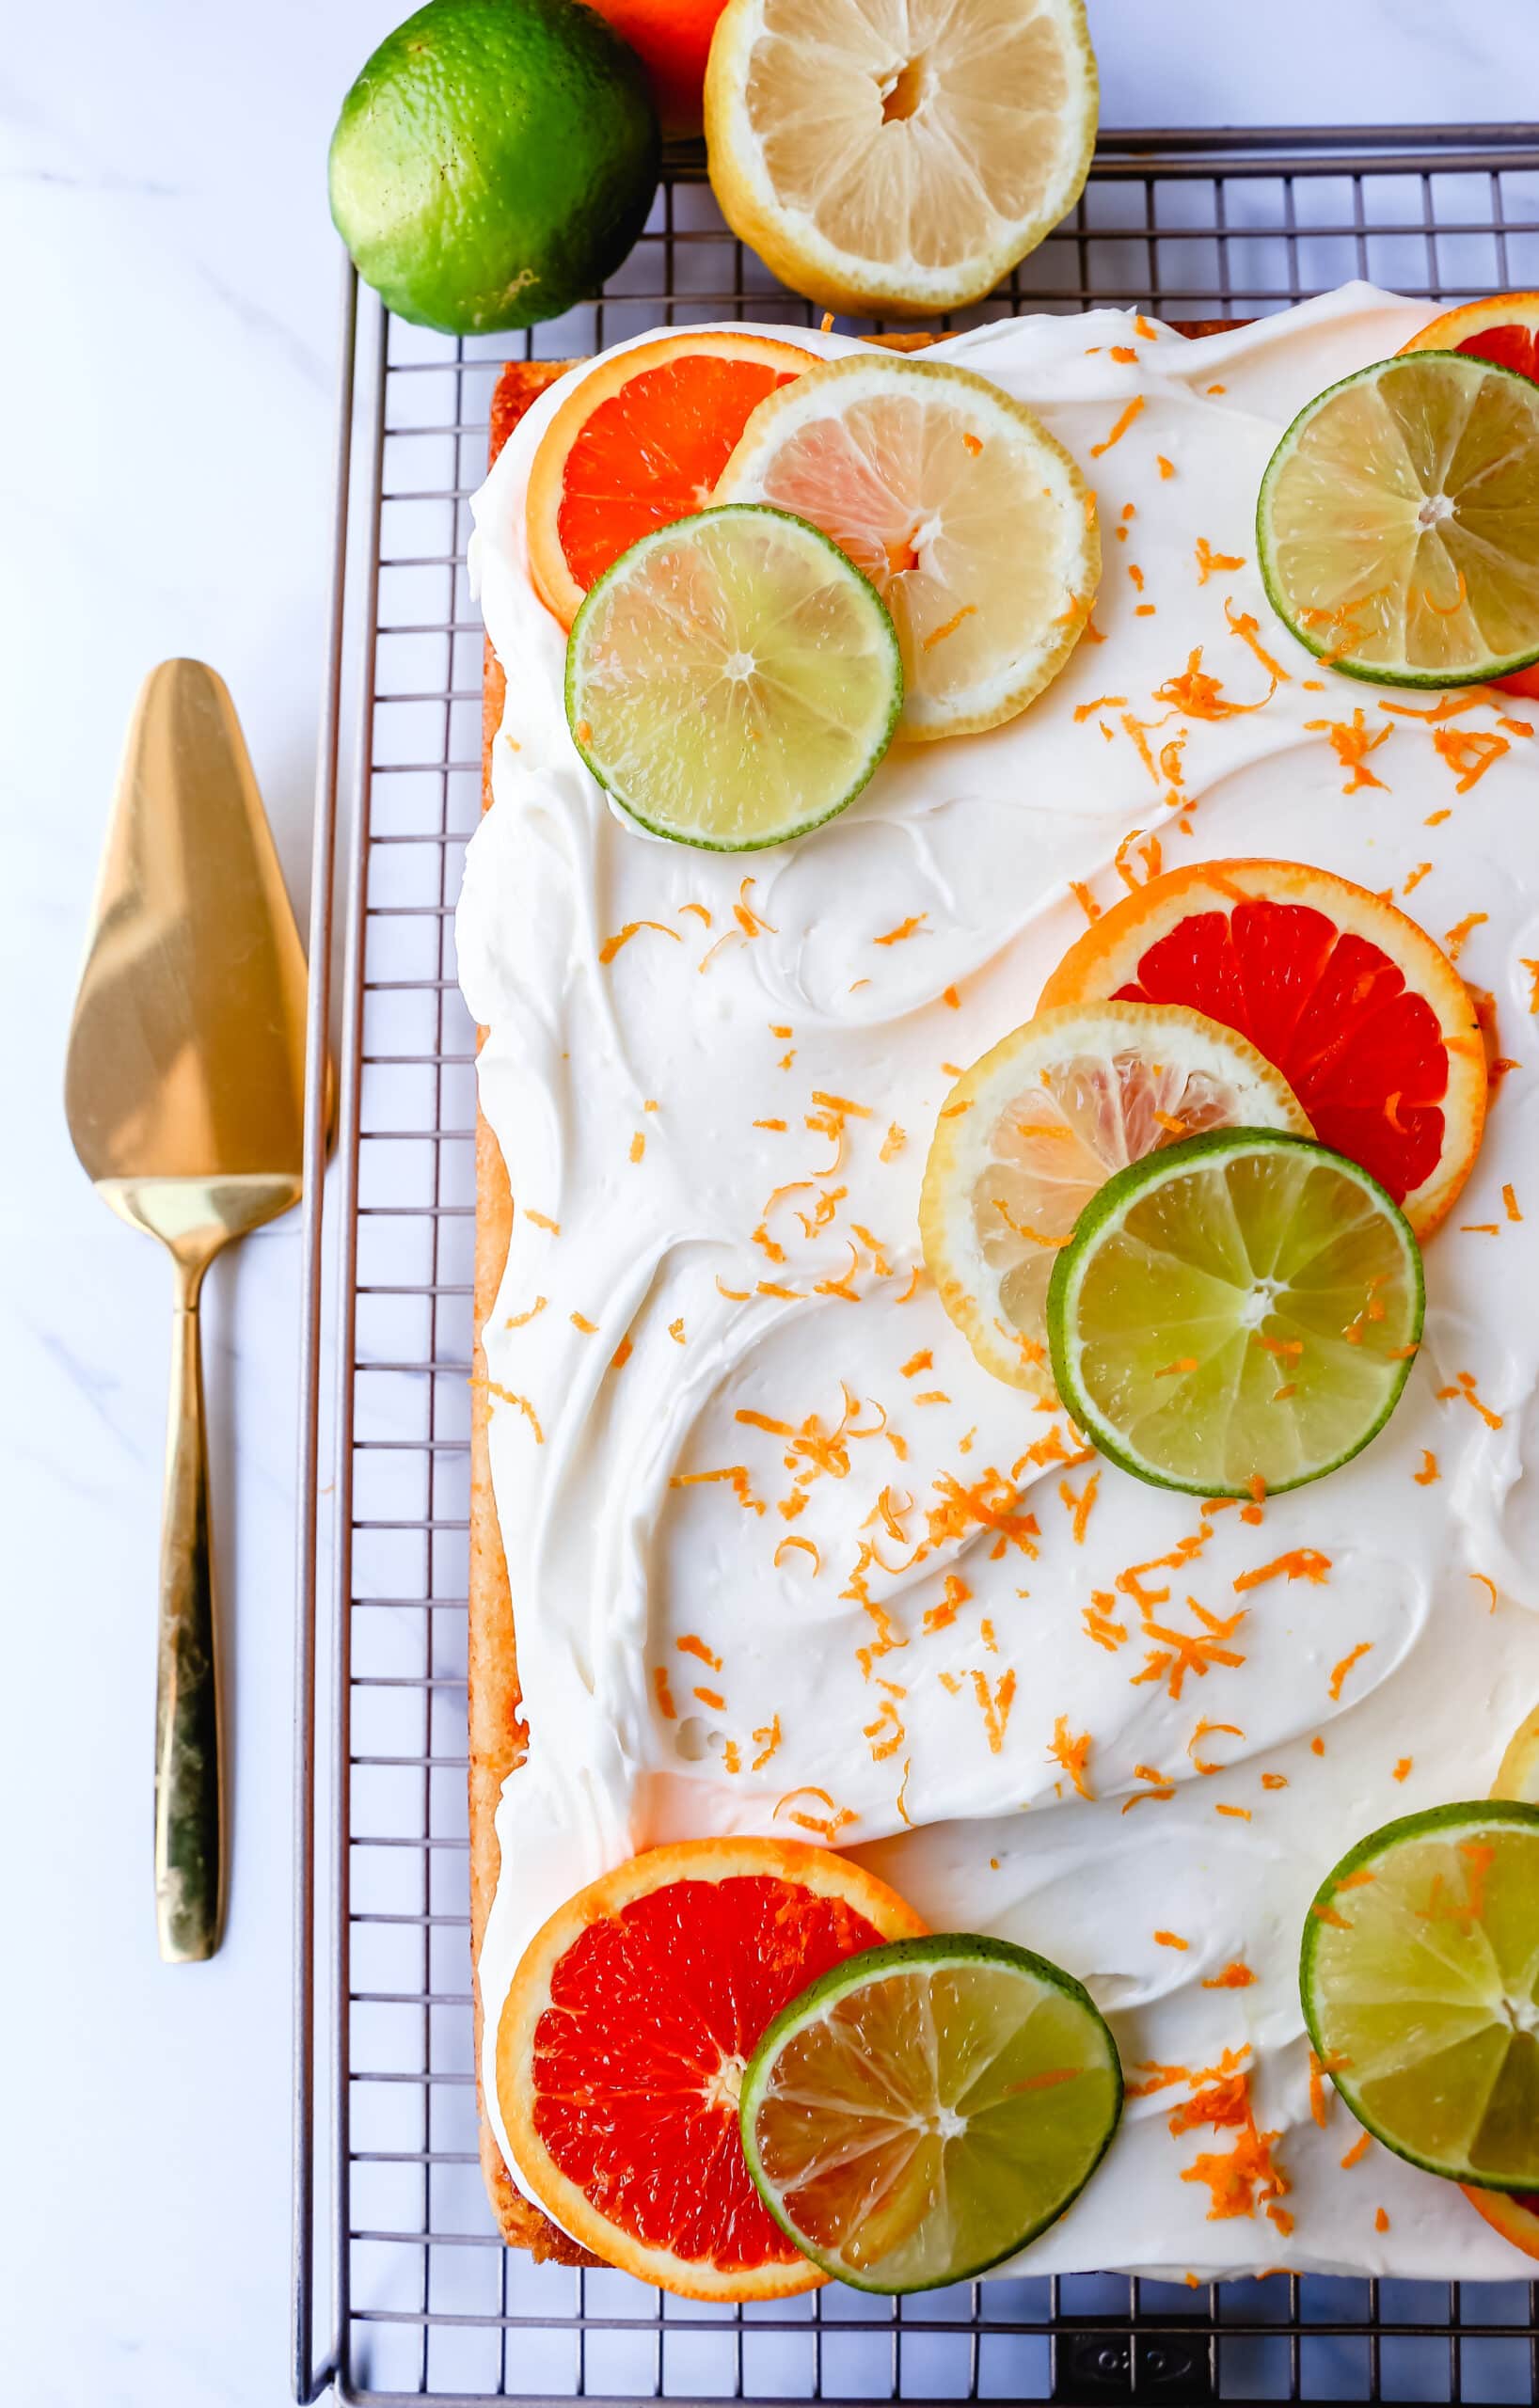 Citrus Sheet Cake made with fresh-squeezed orange, lemon, and lime juices in a moist, fluffy cake and topped with a creamy and silky homemade cream cheese frosting and topped with citrus slices. A beautiful Spring and Summer celebration cake! 